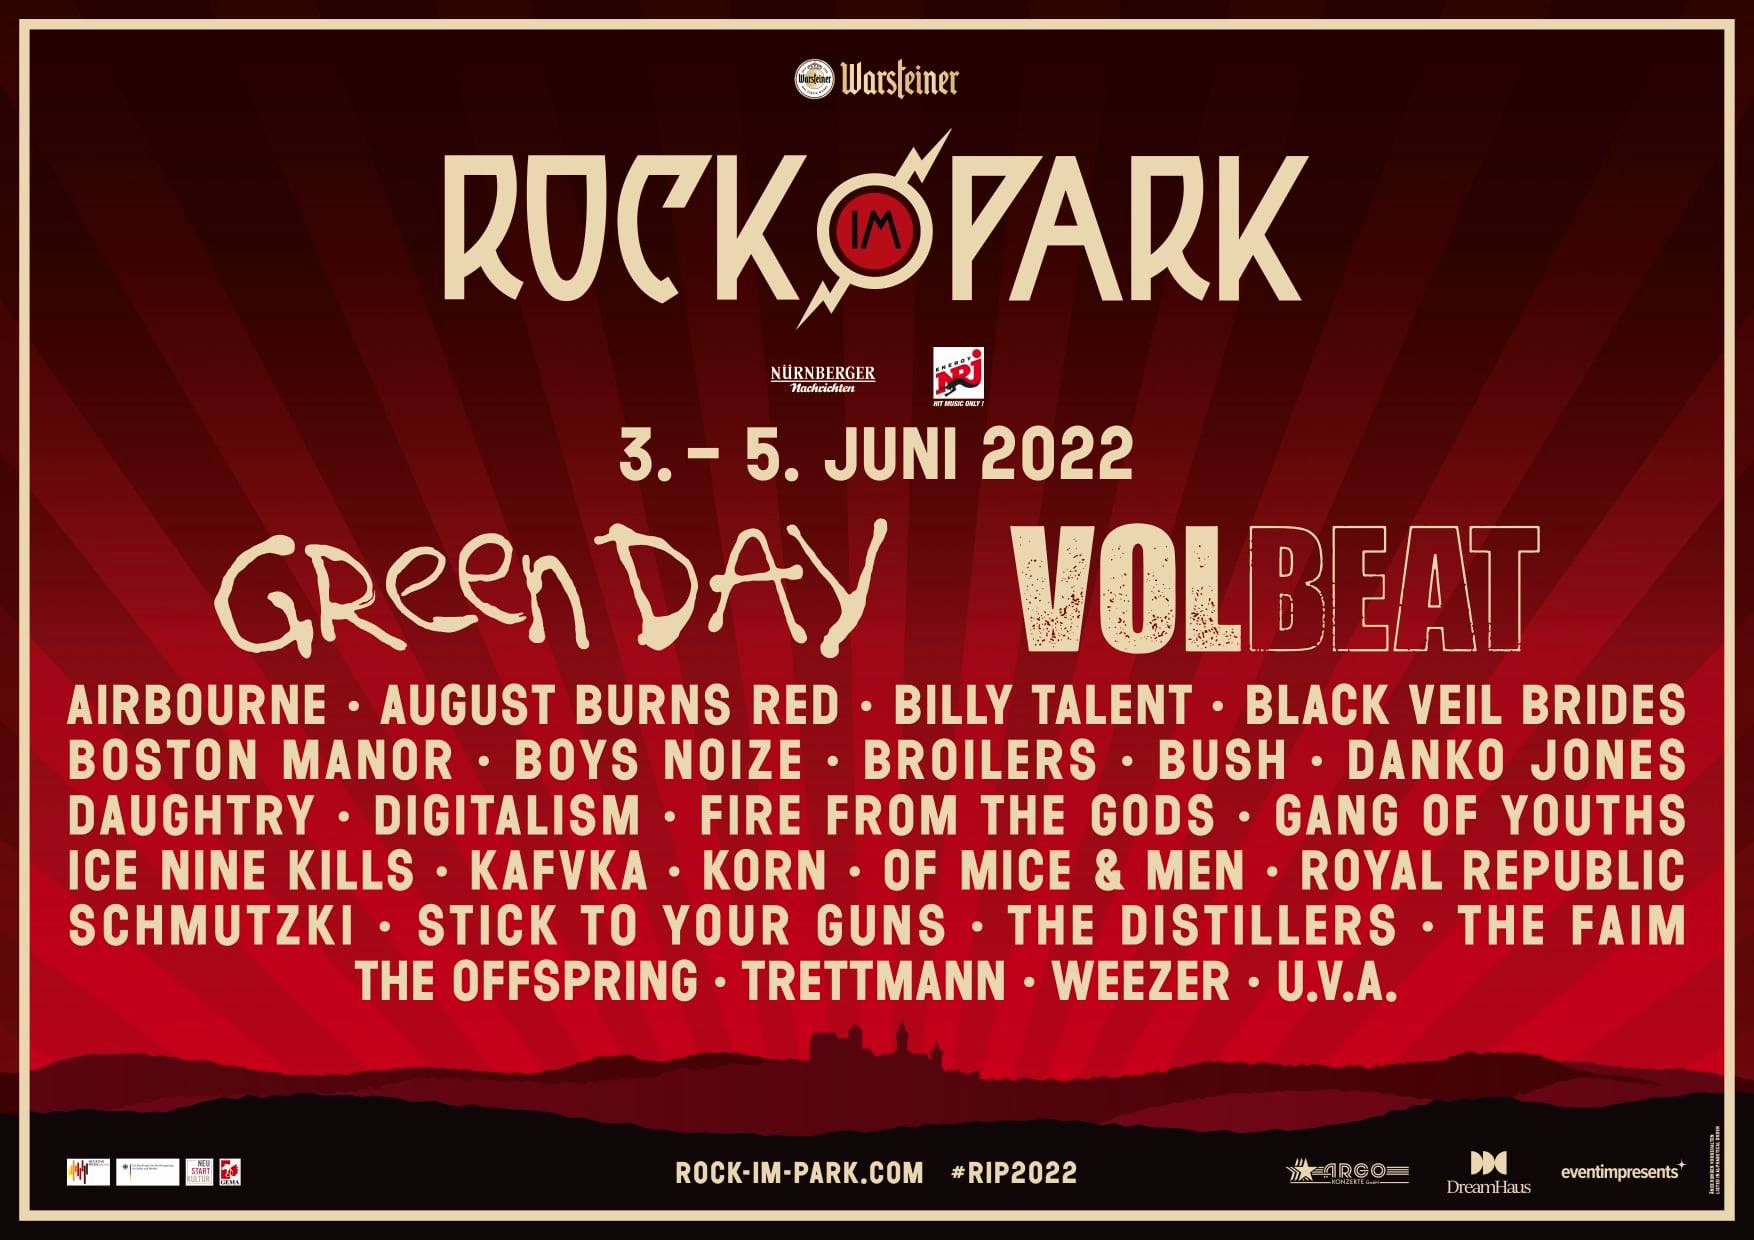 Fobie Uitstekend De volgende Rock am Ring and Rock im Park Announce 2022 Lineup Featuring Green Day, The  Distillers and Korn - mxdwn Music